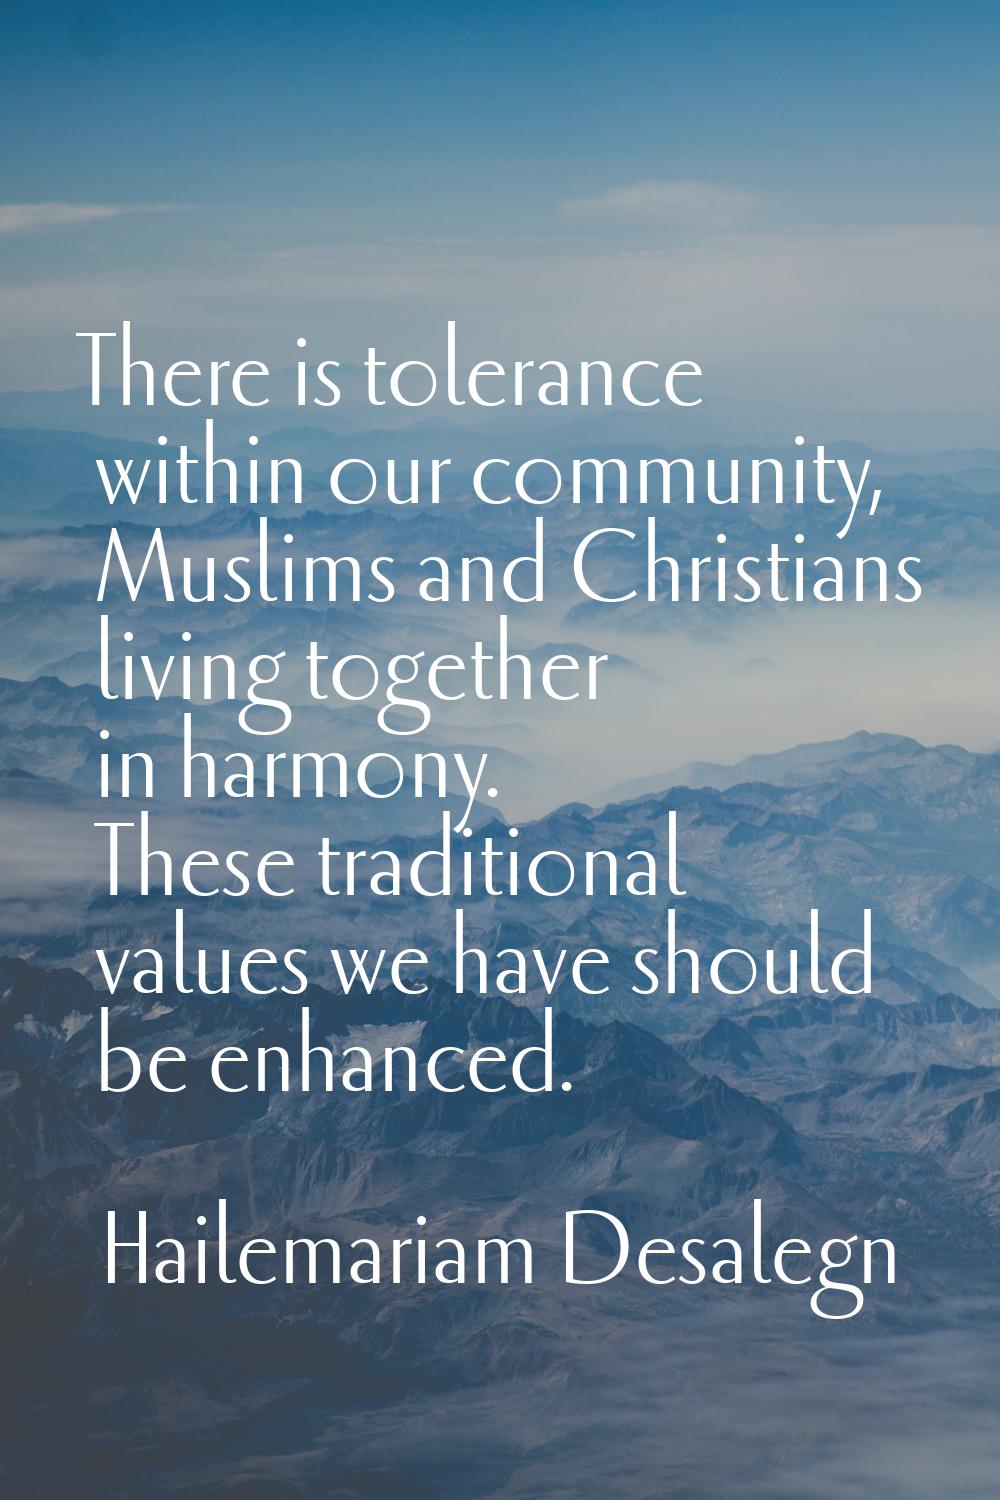 There is tolerance within our community, Muslims and Christians living together in harmony. These t